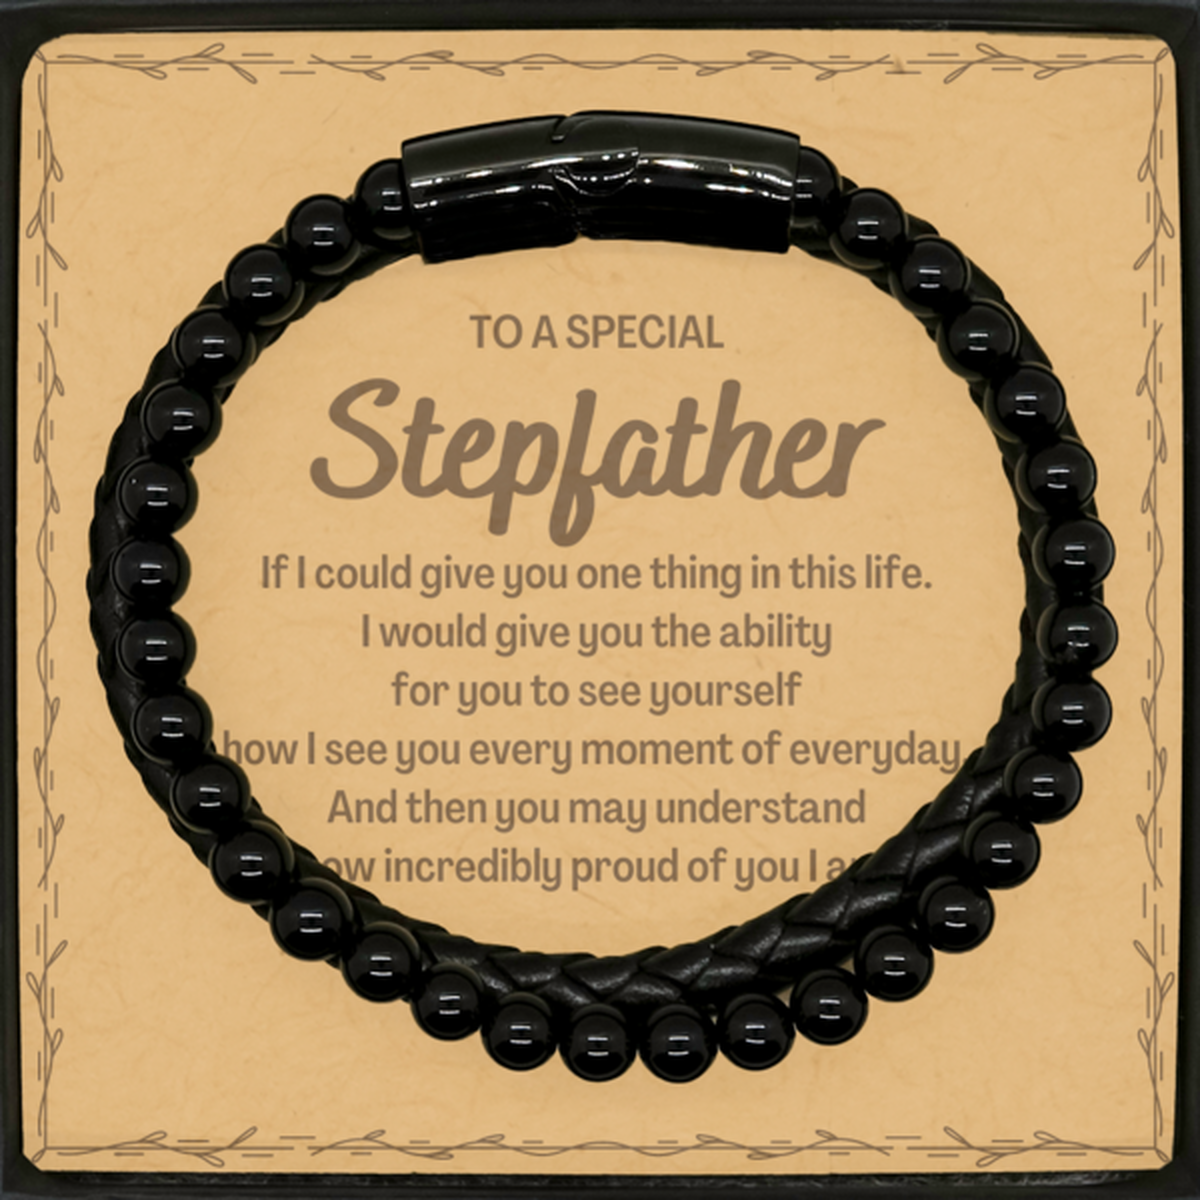 To My Stepfather Stone Leather Bracelets, Gifts For Stepfather Message Card, Inspirational Gifts for Christmas Birthday, Epic Gifts for Stepfather To A Special Stepfather how incredibly proud of you I am